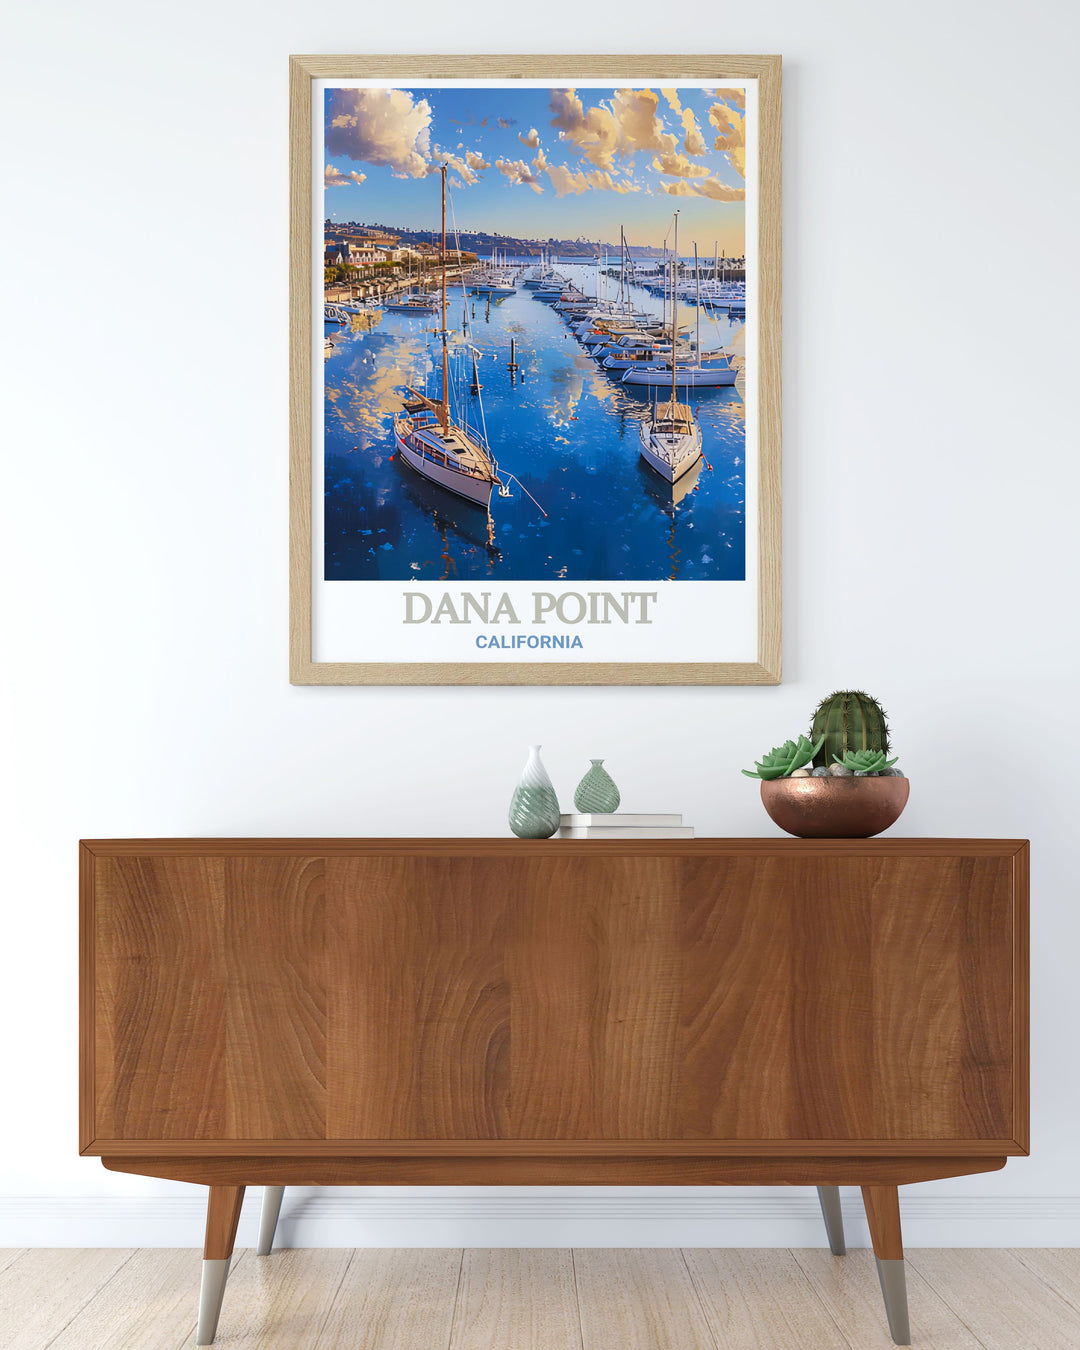 Enhance your home decor with this beautiful Dana Point Harbor print. Featuring the intricate details of the harbor this California artwork is ideal for anyone who loves the serene and captivating landscapes of Dana Point Harbor.